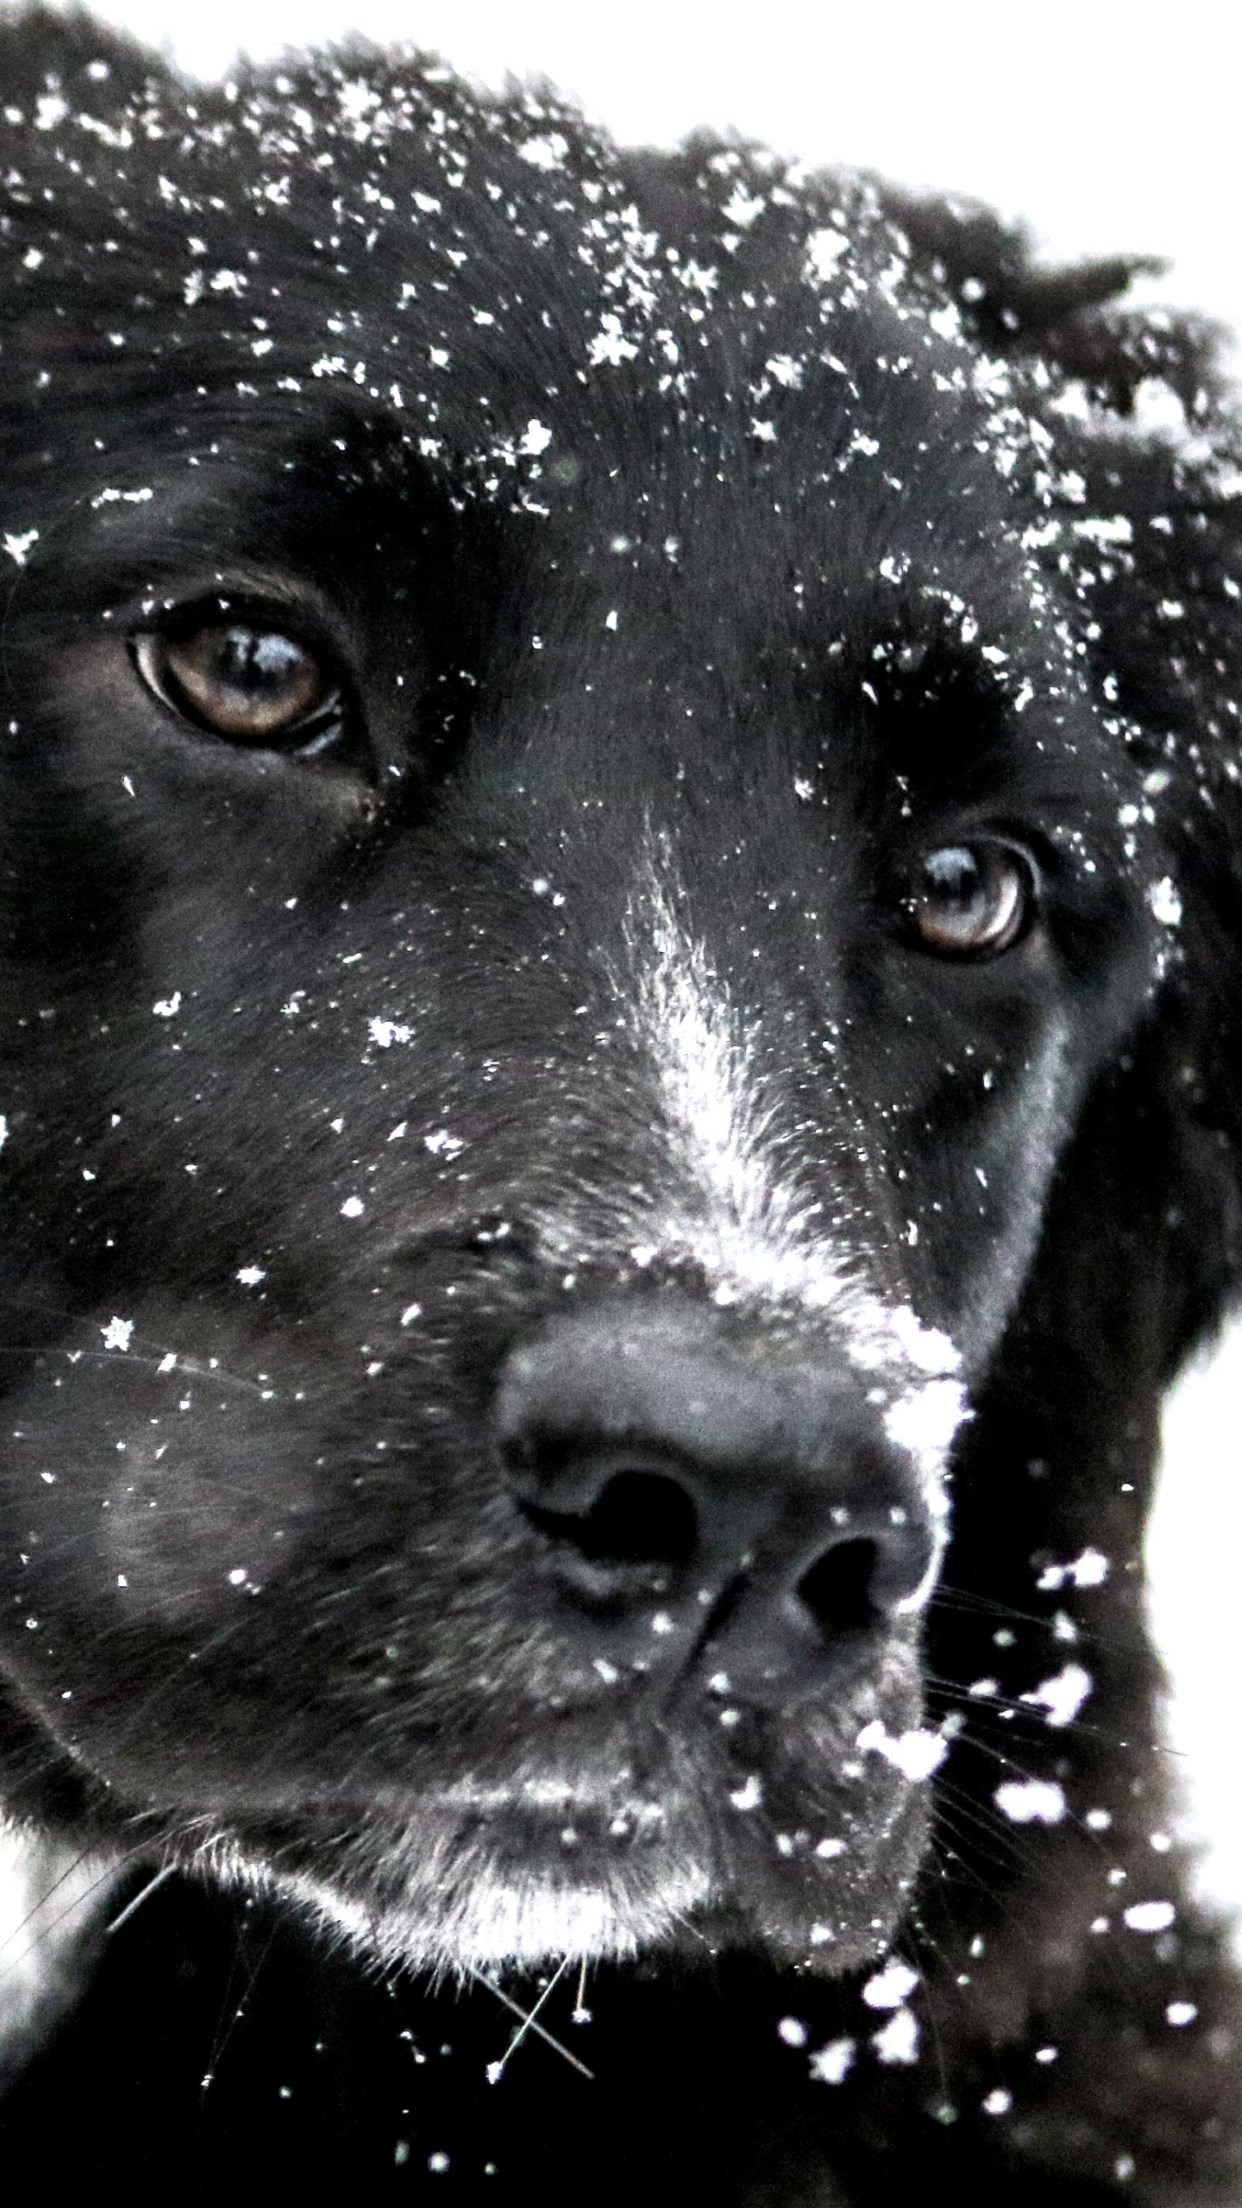 Snowing over the cute dog wallpaper 1242x2208